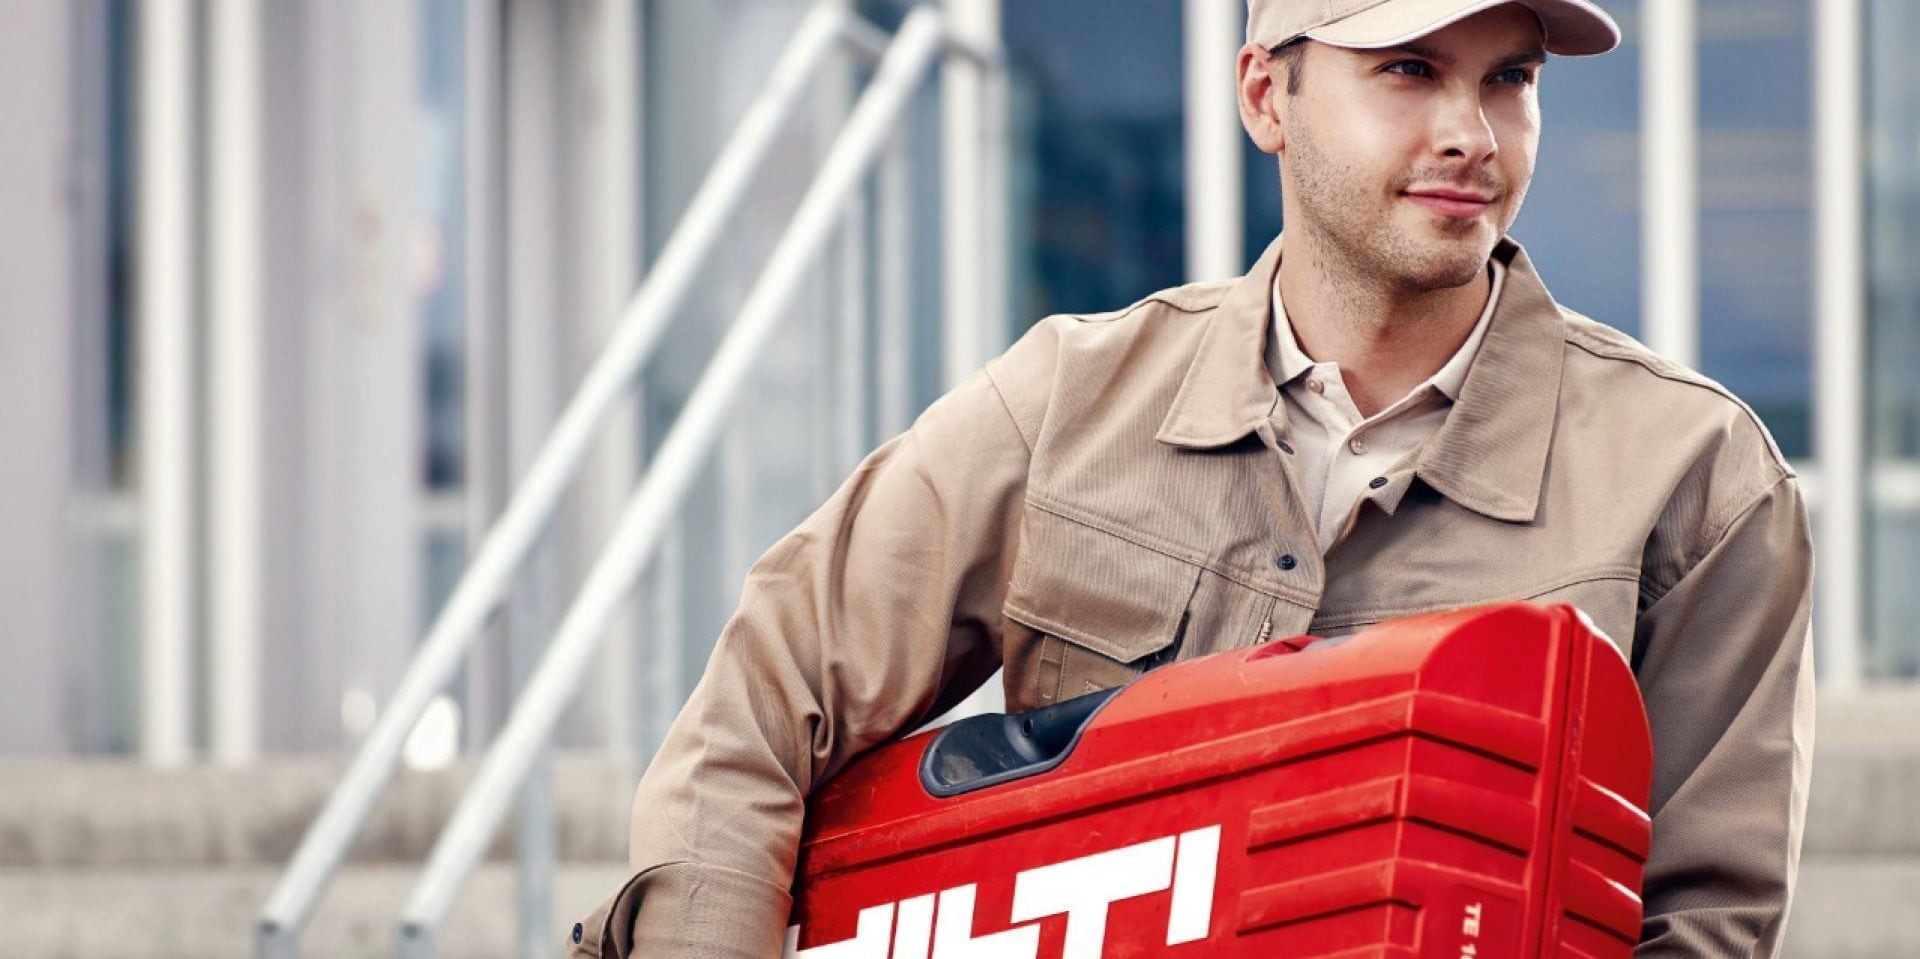 Hilti's mobile repair service makes long waits for damaged equipment a thing of the past.